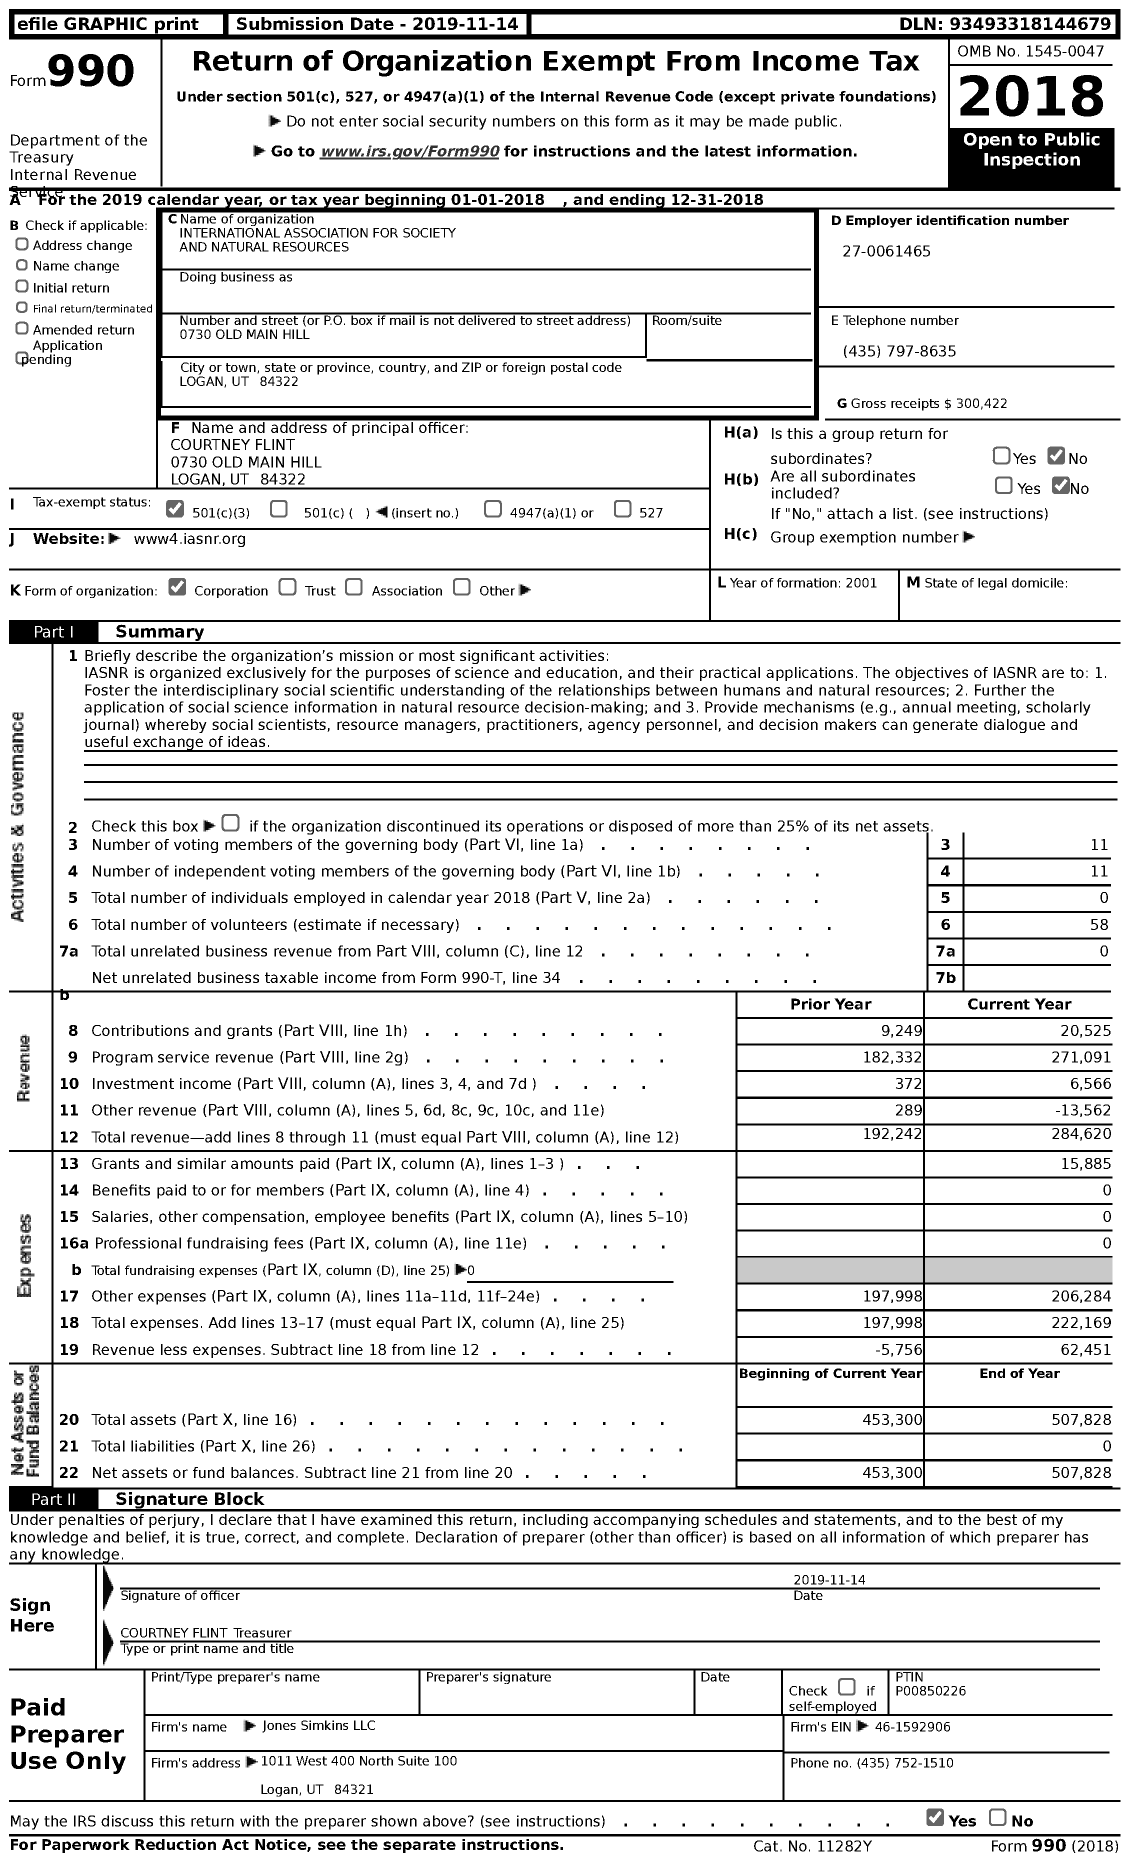 Image of first page of 2018 Form 990 for International Association for Society and Natural Resources